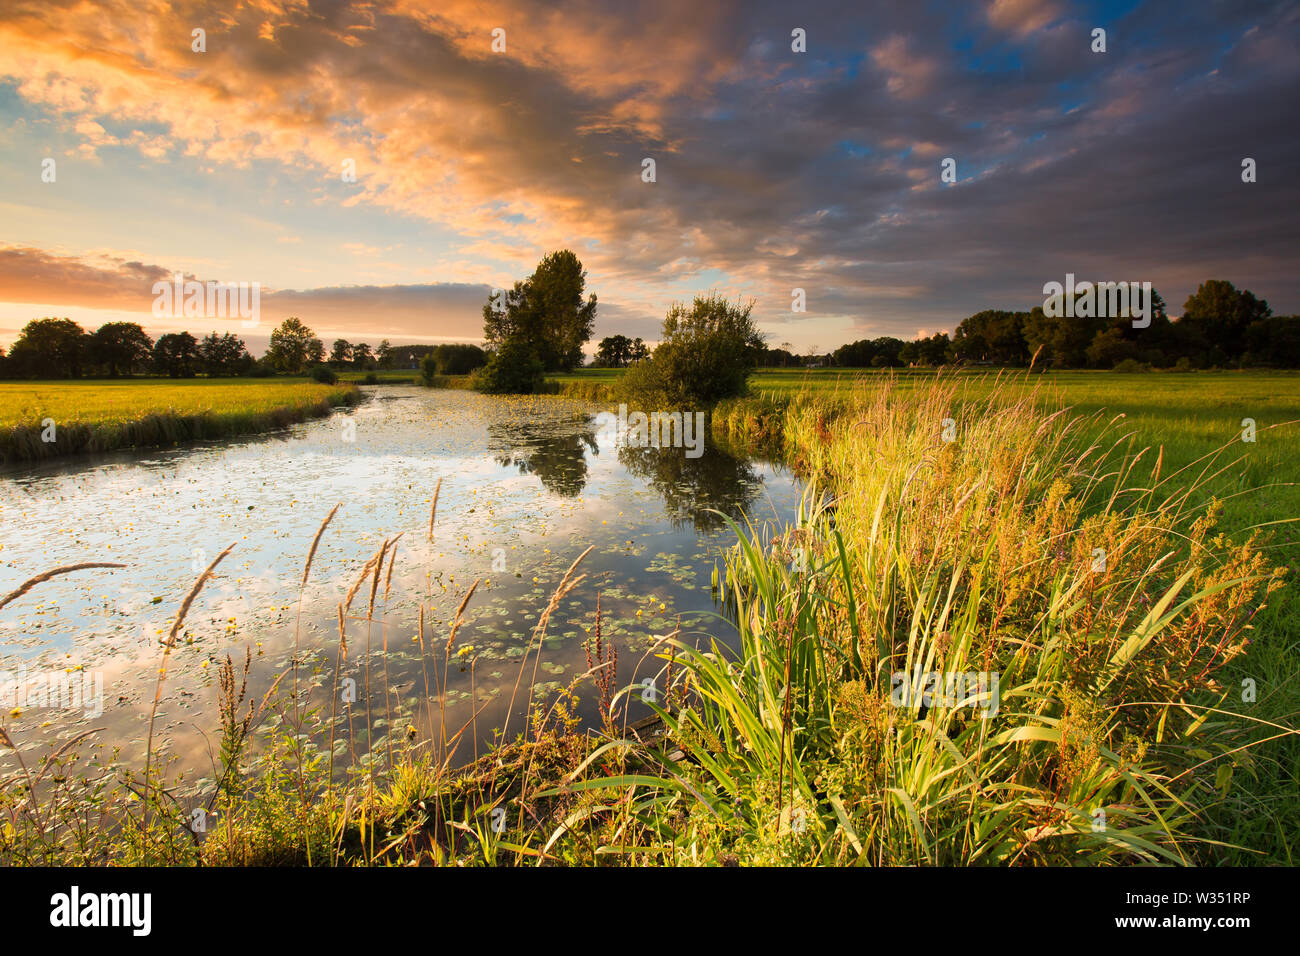 A meandering river in summer with lush grass and warm evening light with bright sunlight - Reest - Reestdal, Meppel, The Netherlands Stock Photo